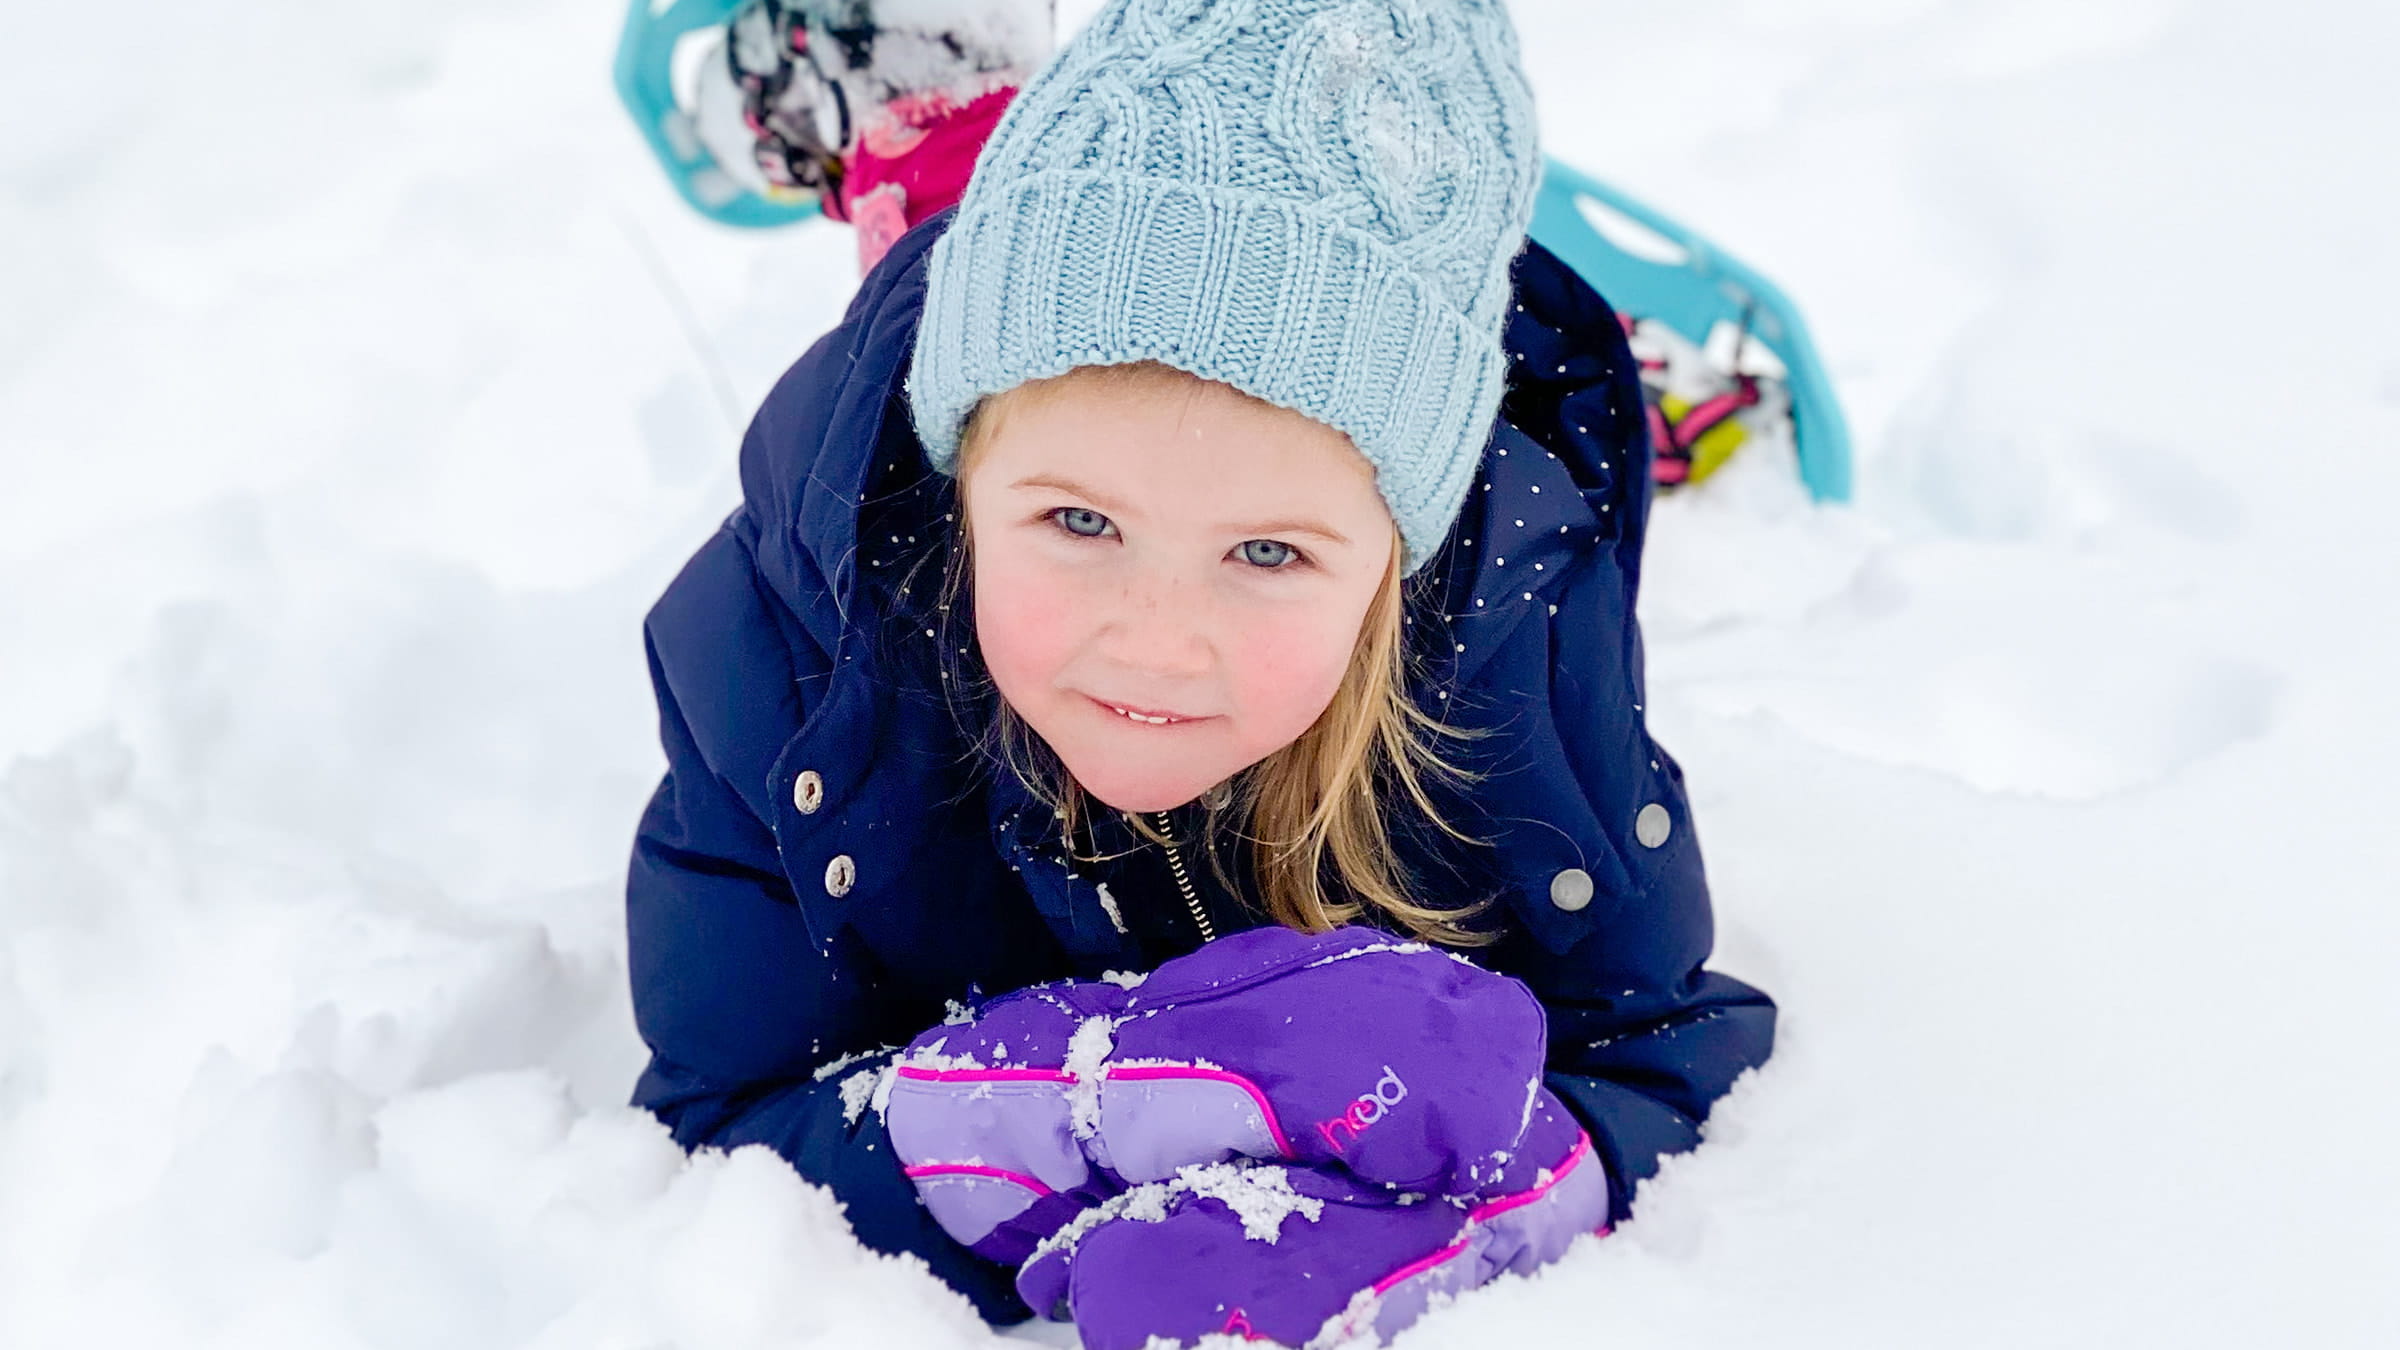 Girl smiling and playing in the snow.